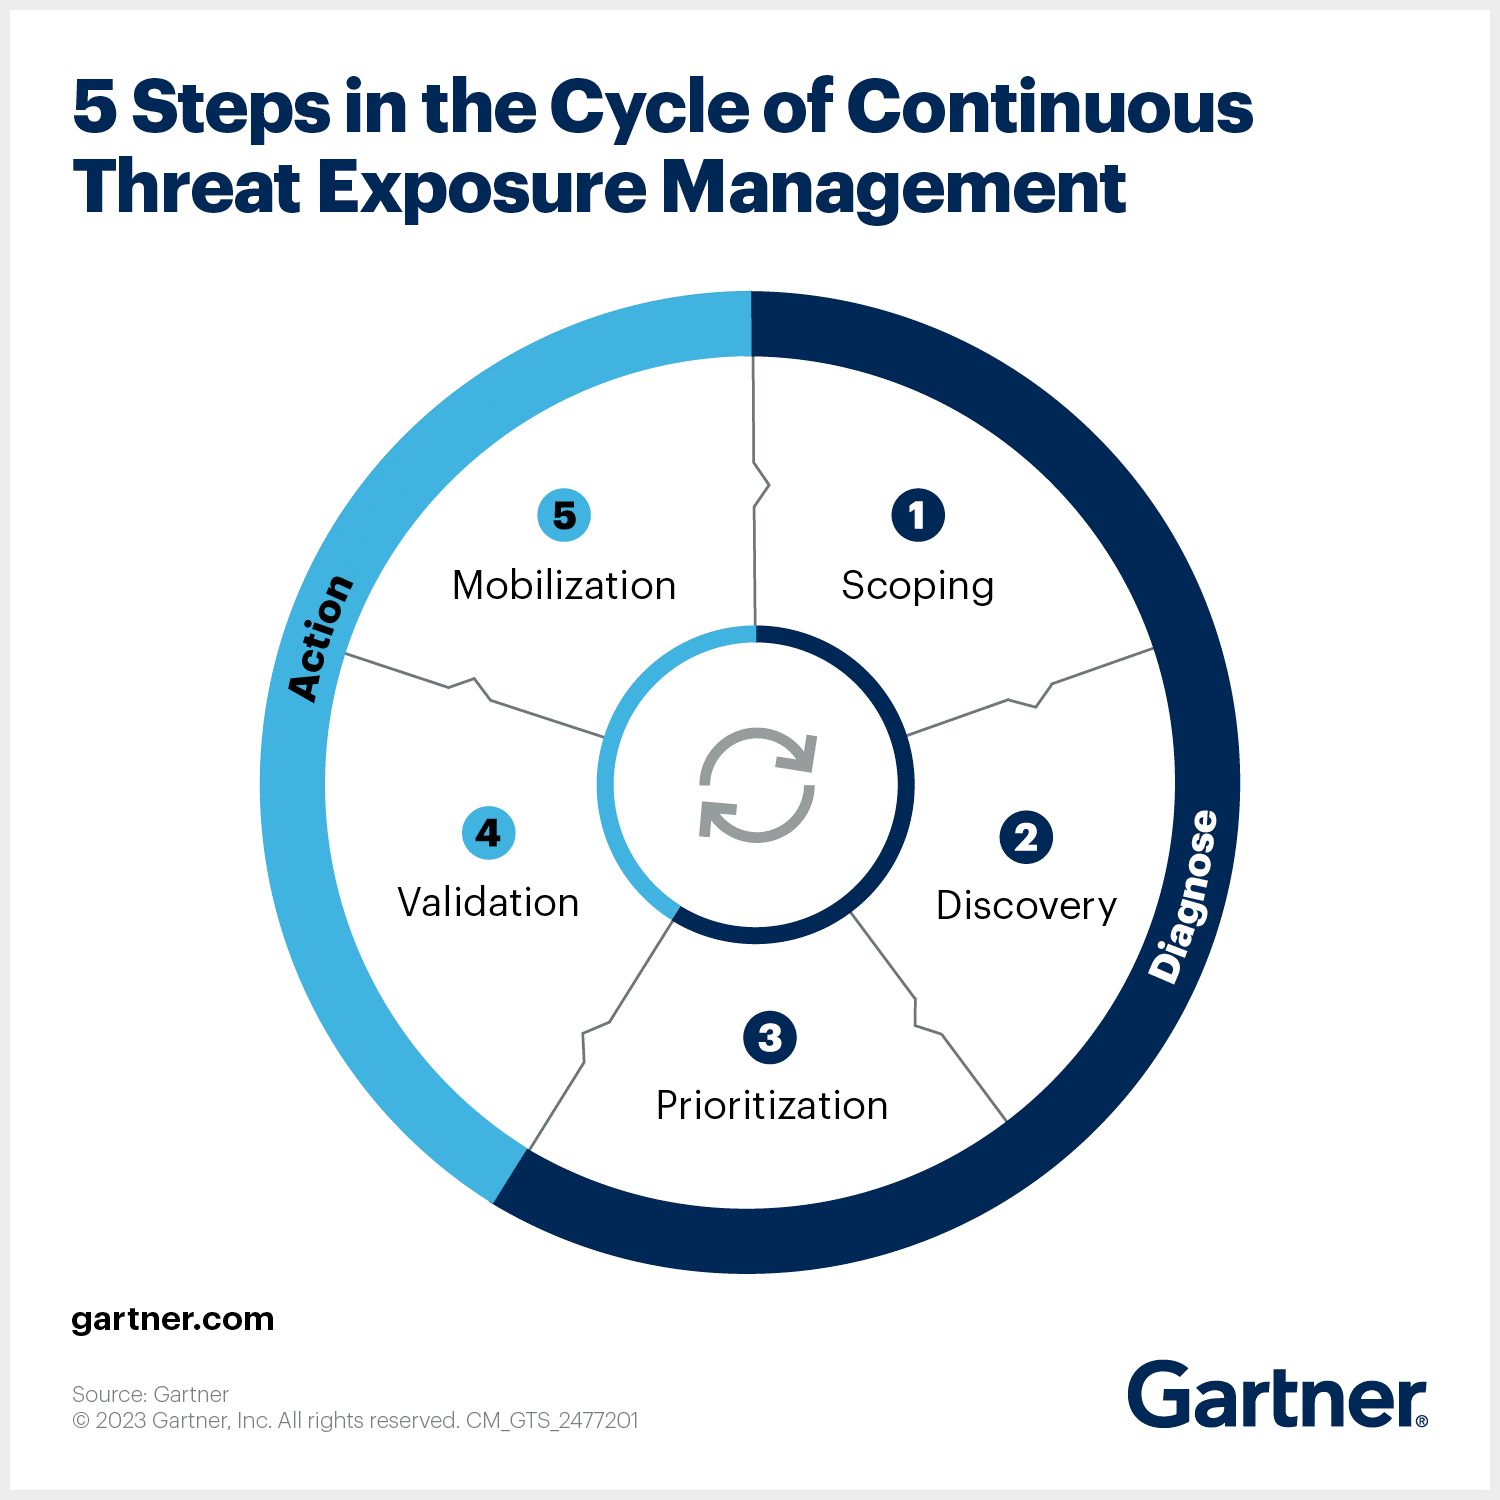 Gartner: 5 steps in the cycle of continuous threat exposure management